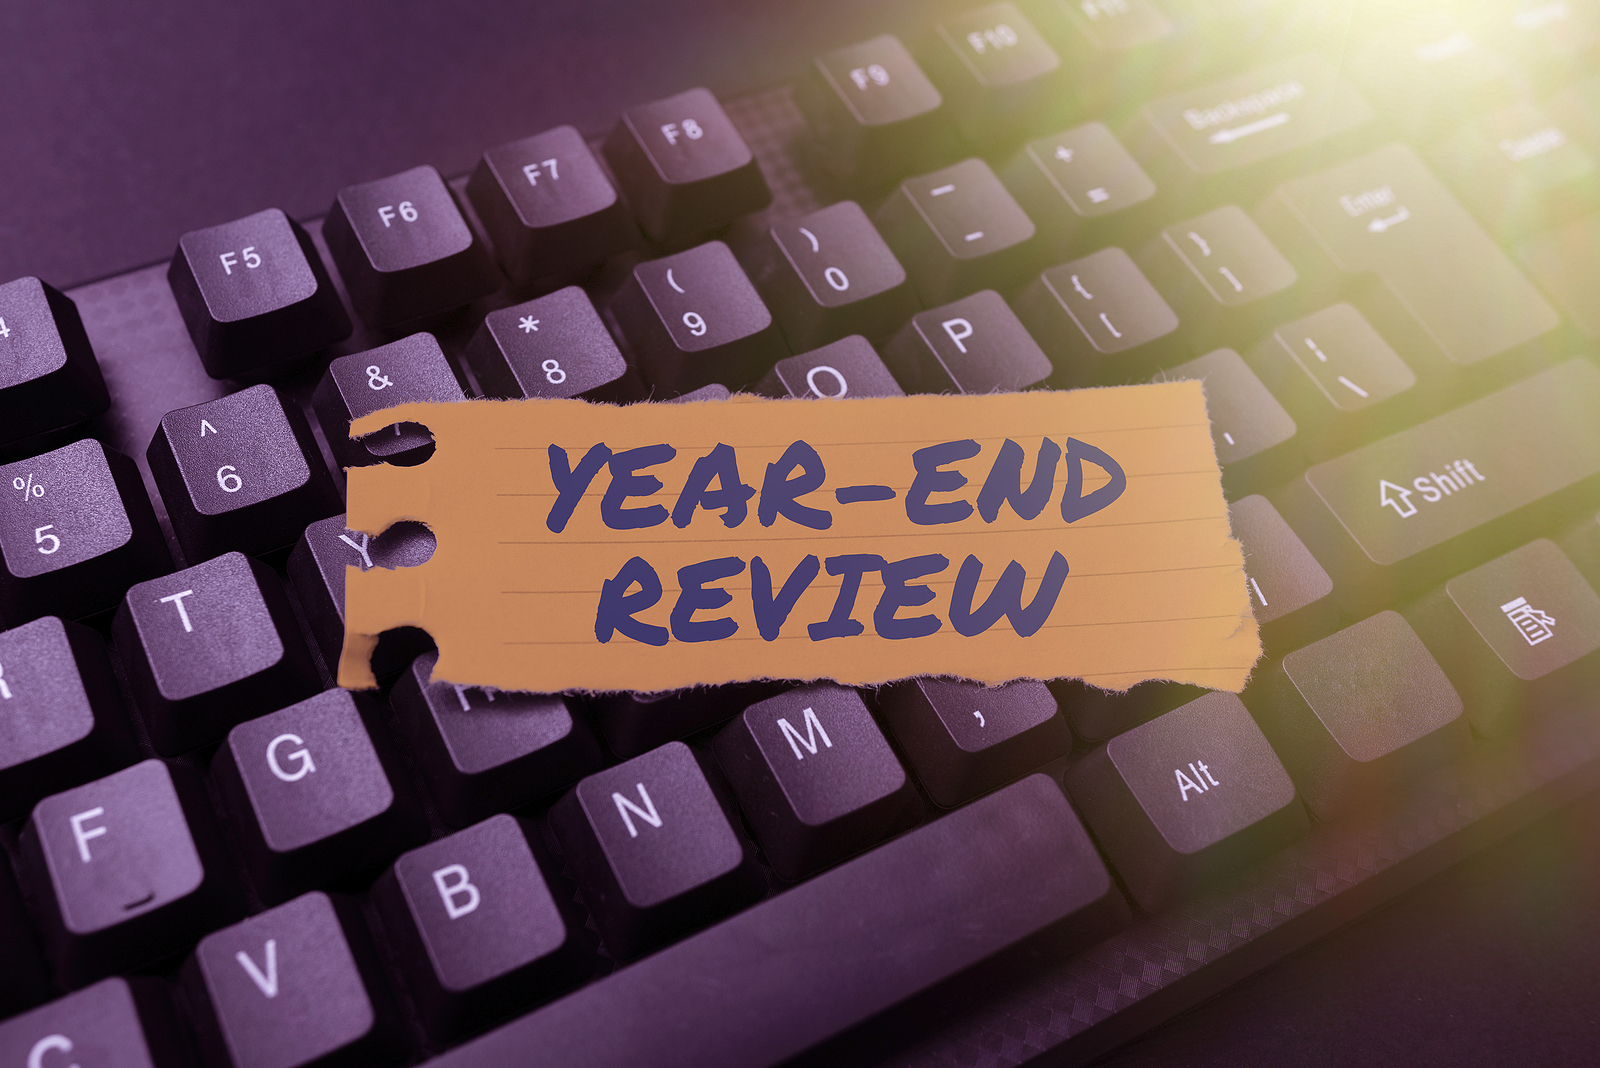 Year end review text over image of a keyboard